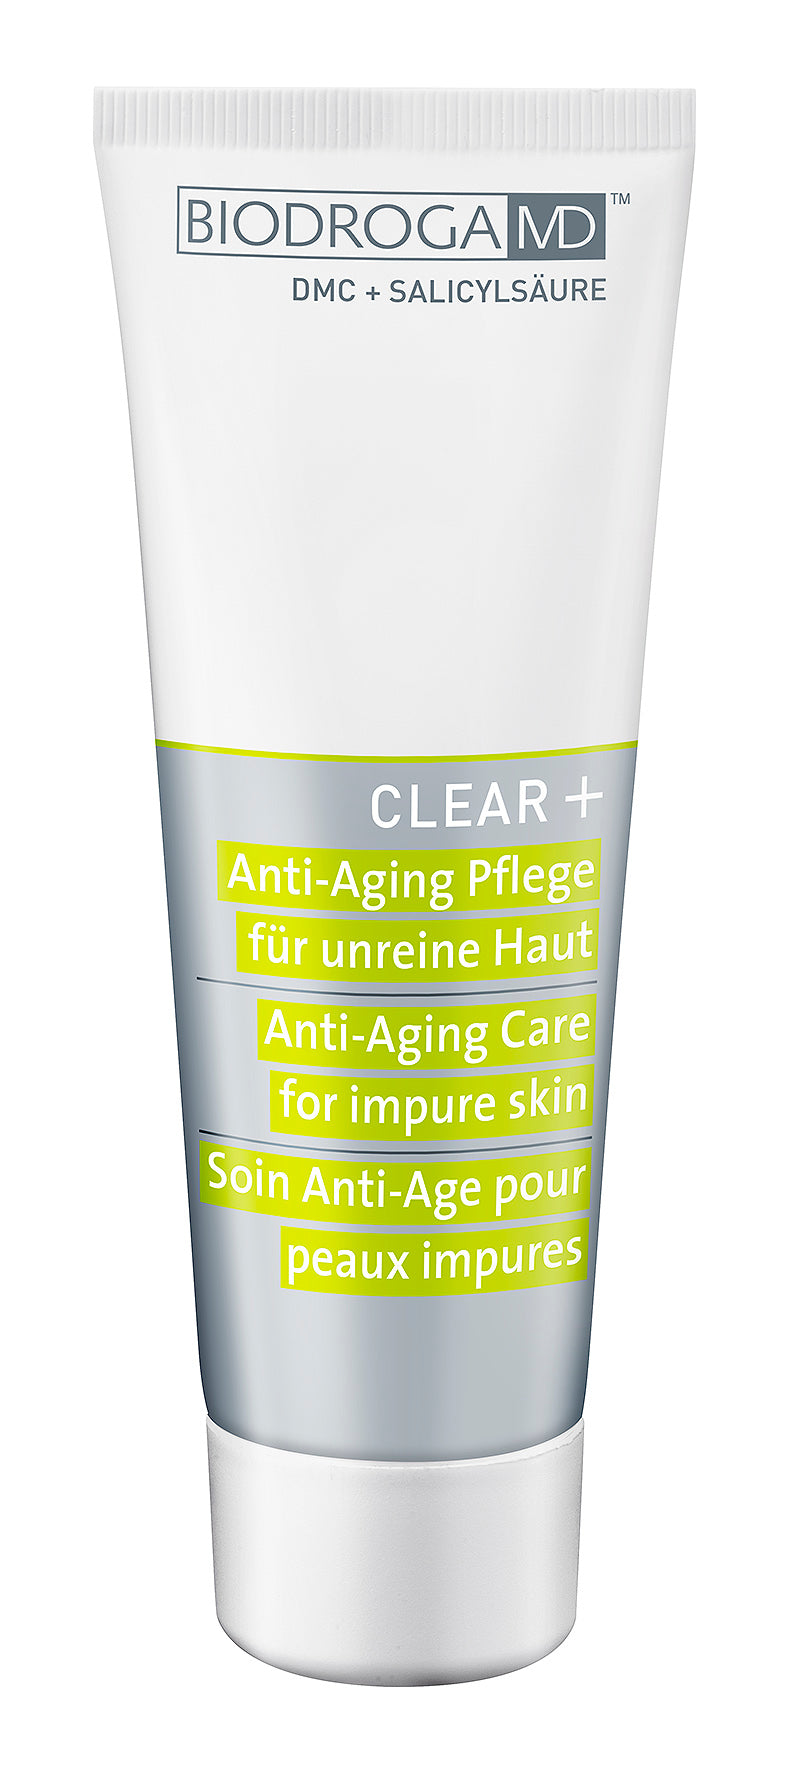 Clear+ Anti-Aging Care for impure skin